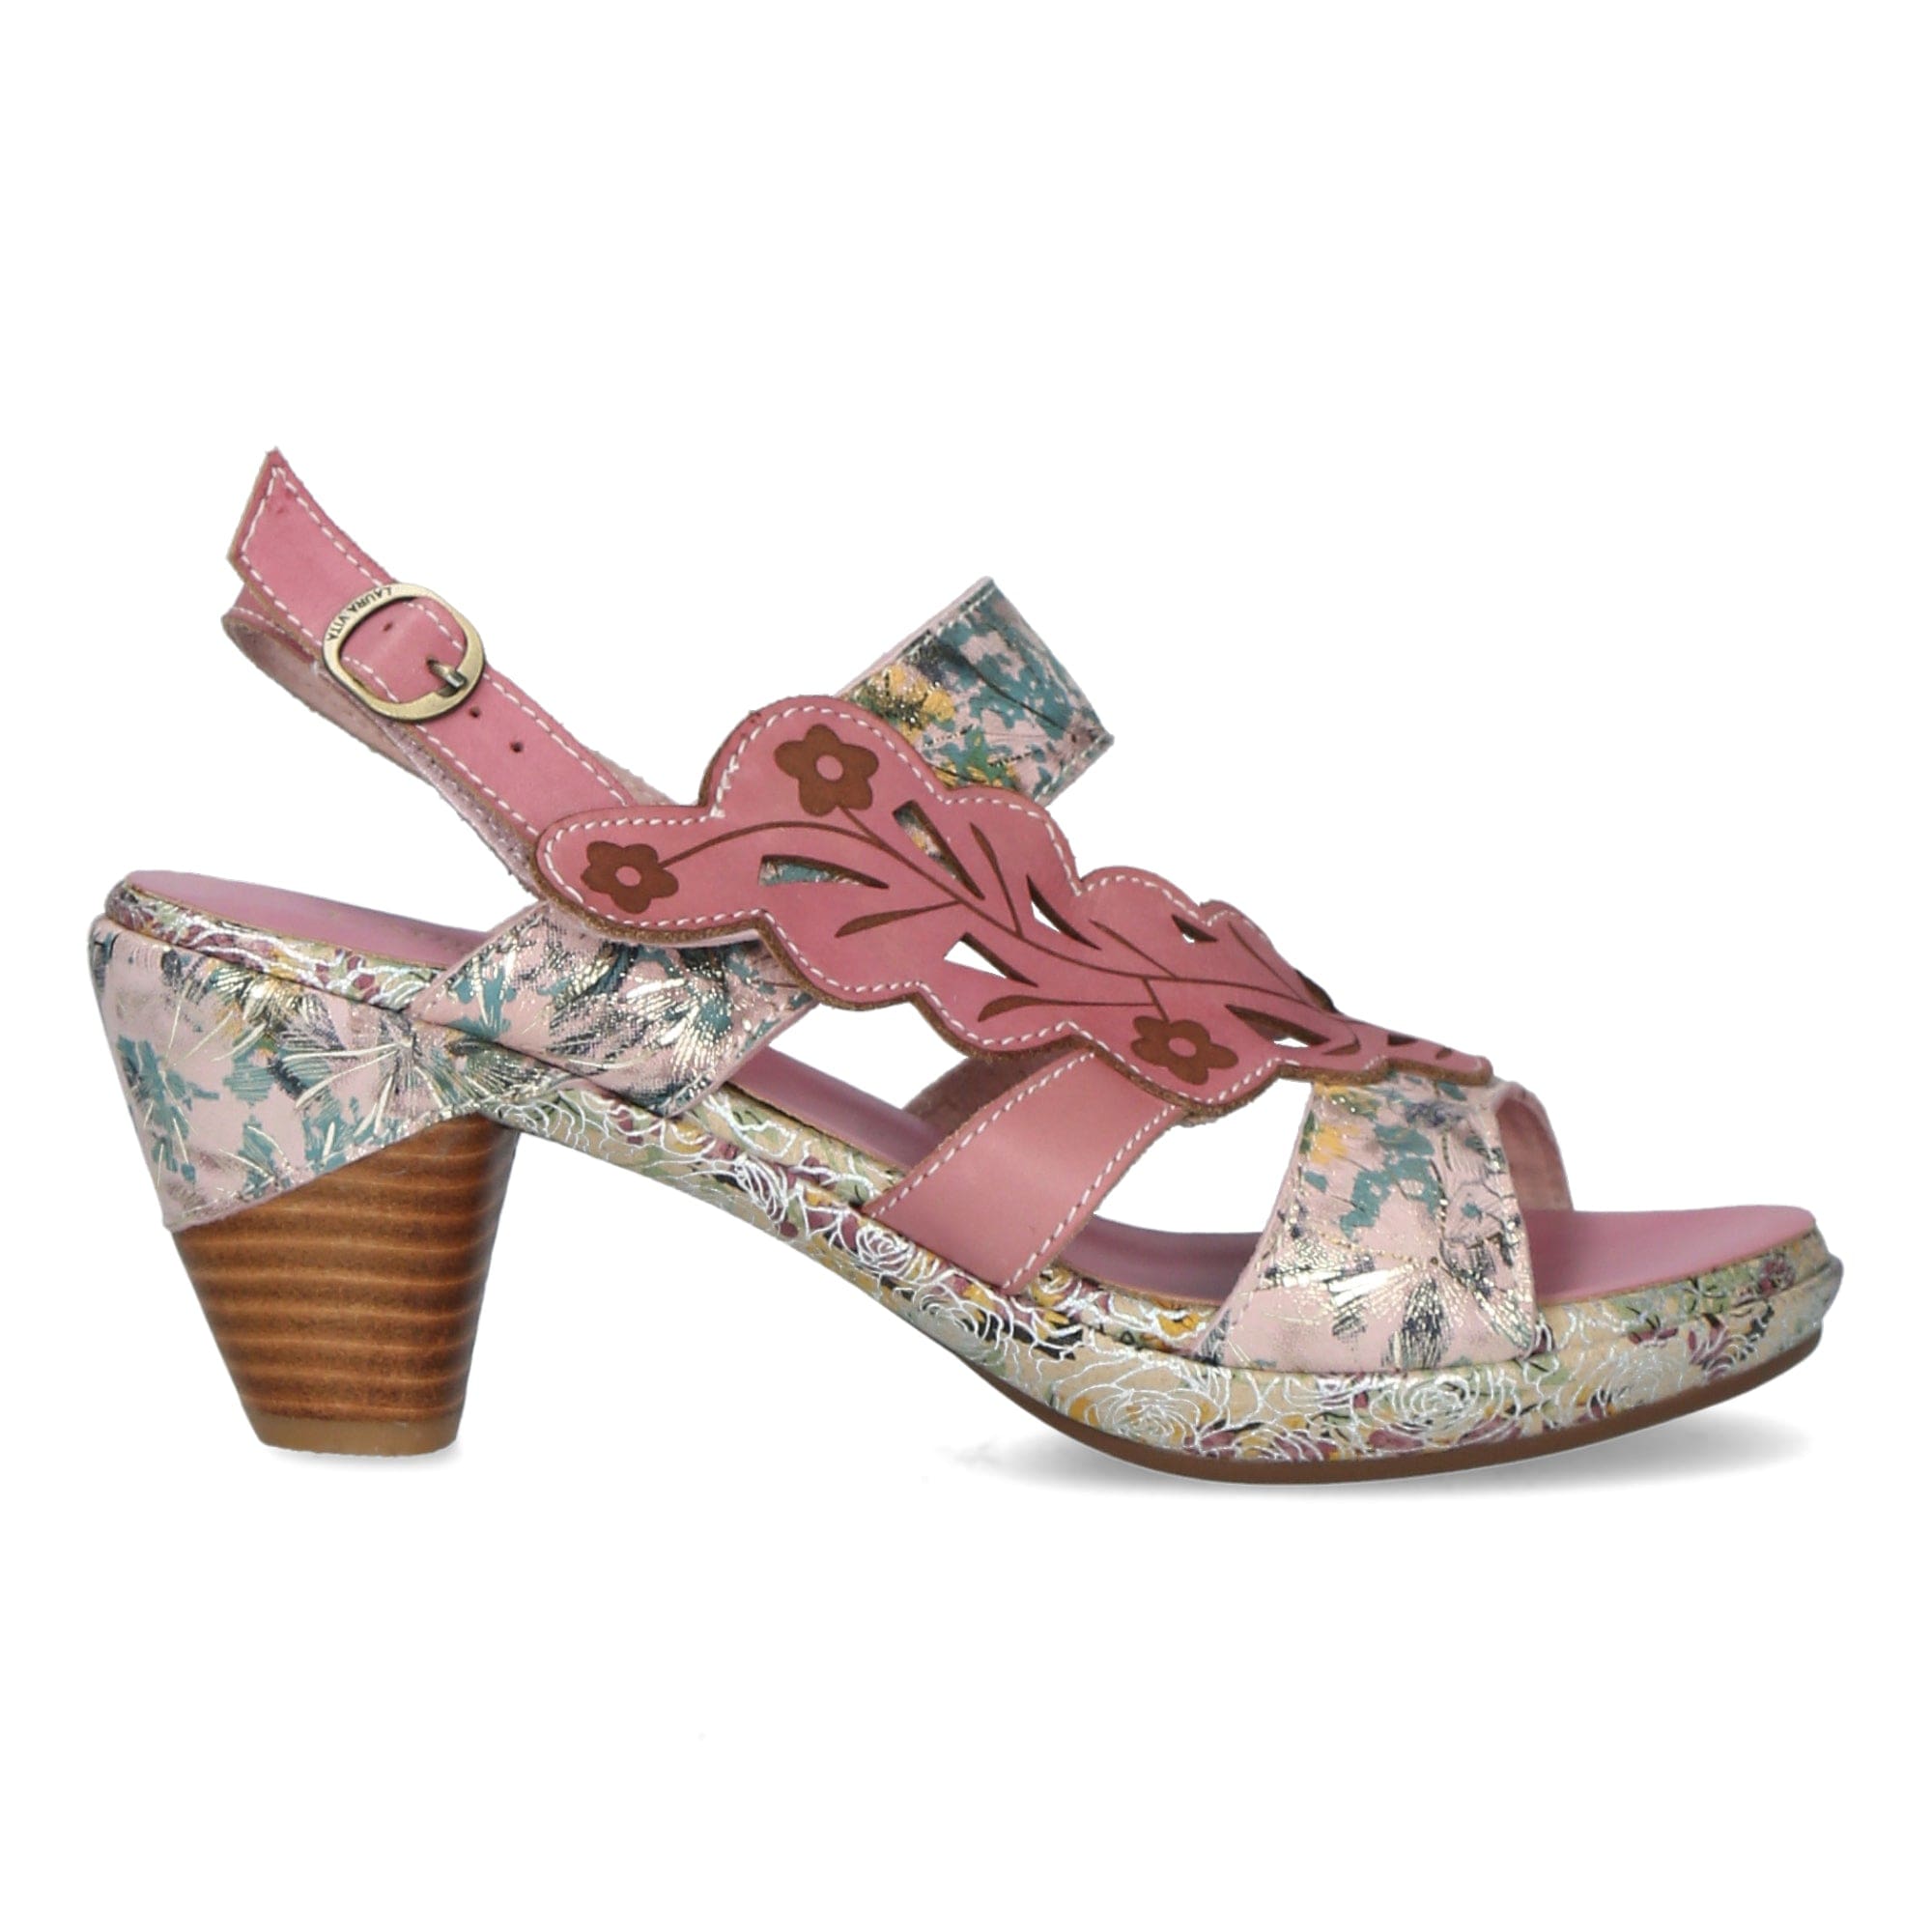 Schuhe BECLFORTO 12 - 35 / PINK - Sandale